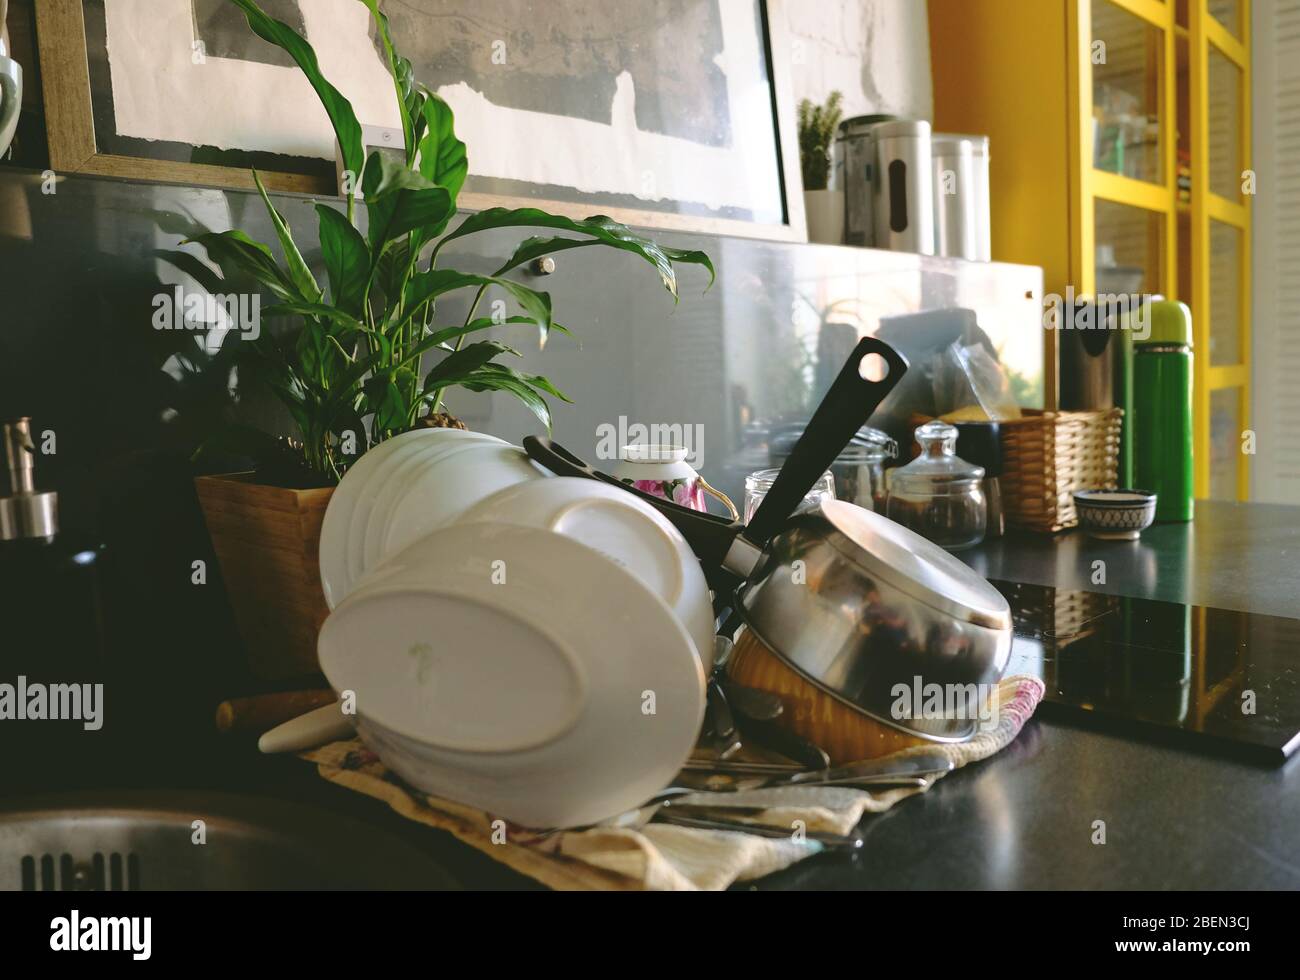 kitchen interior with clean dishes on the table Stock Photo - Alamy